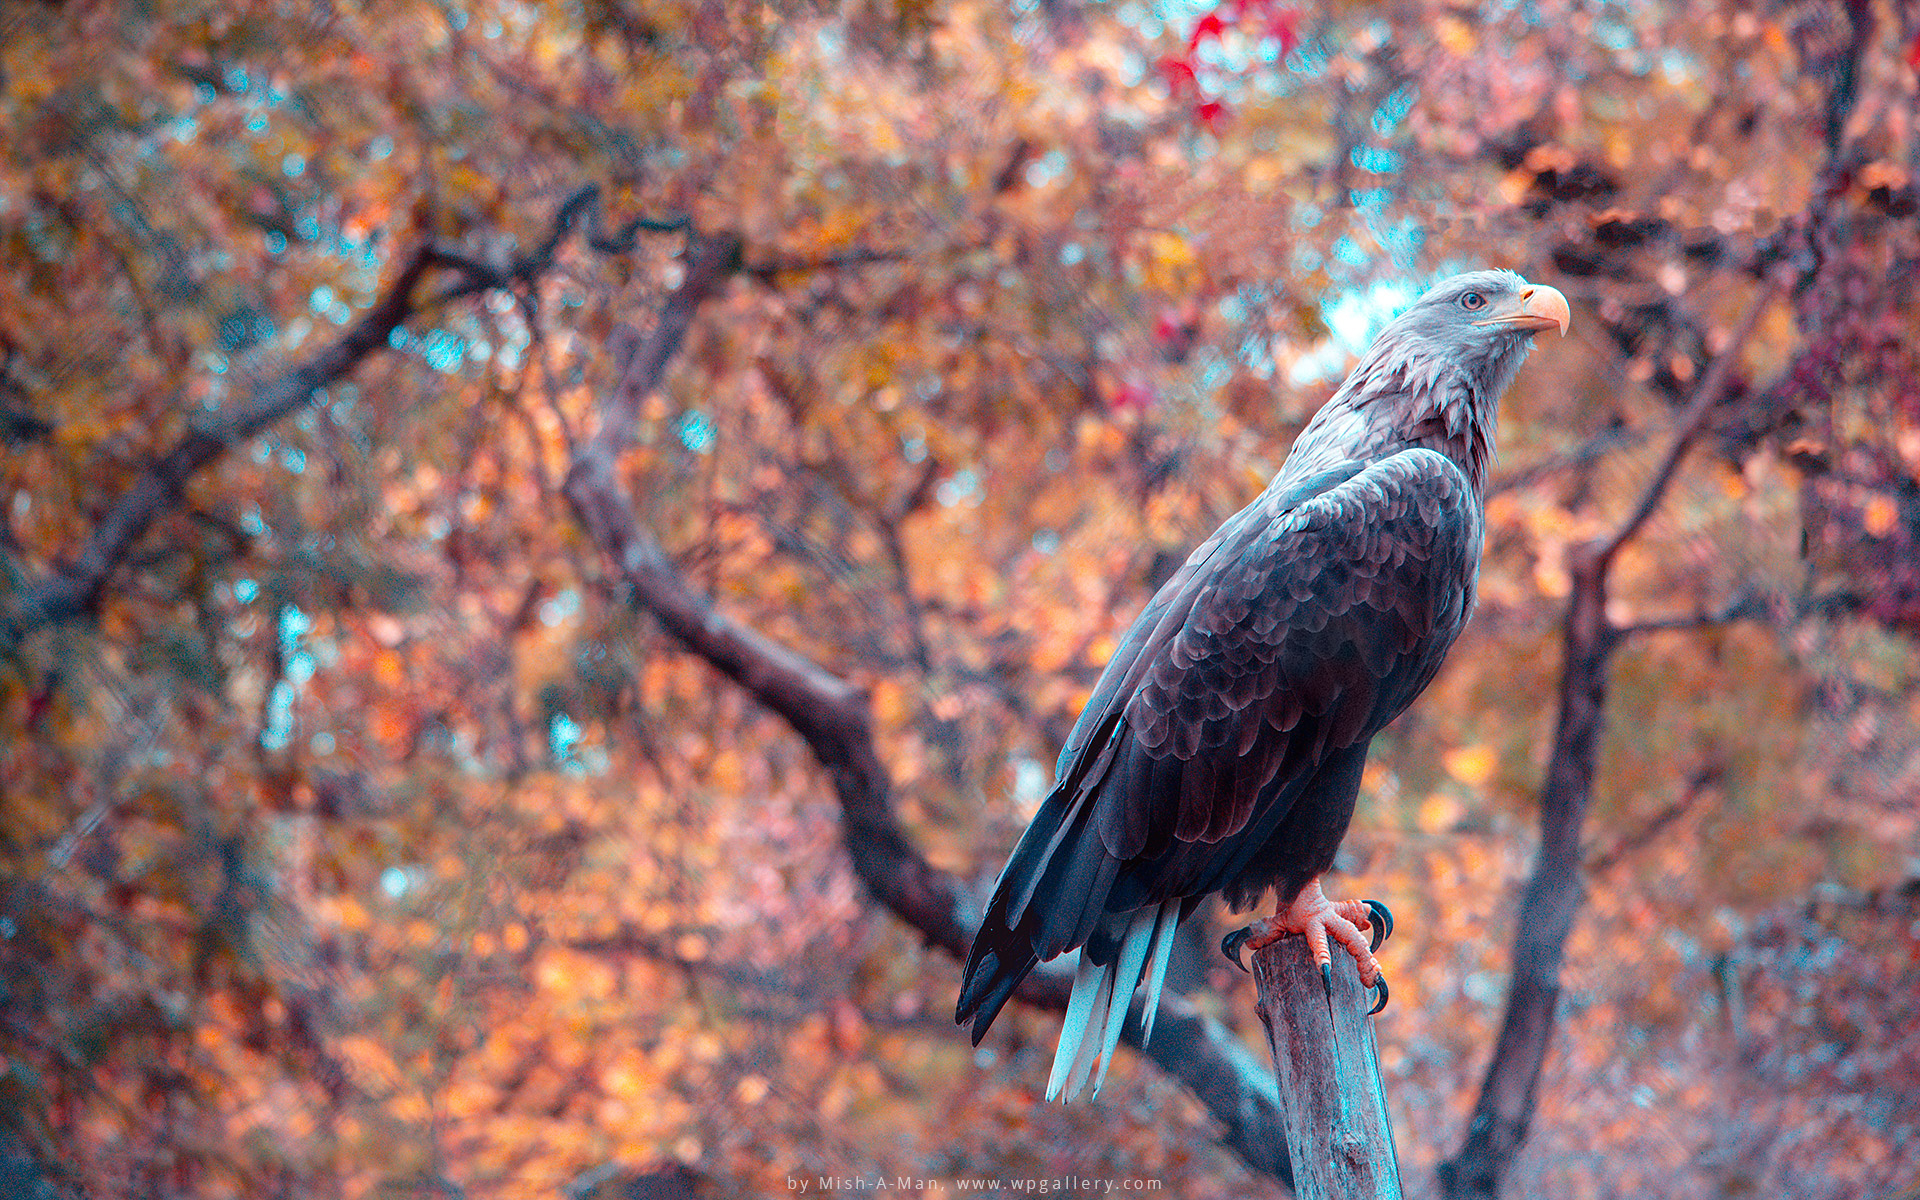 Autumn Eagle by Mish-A-Man